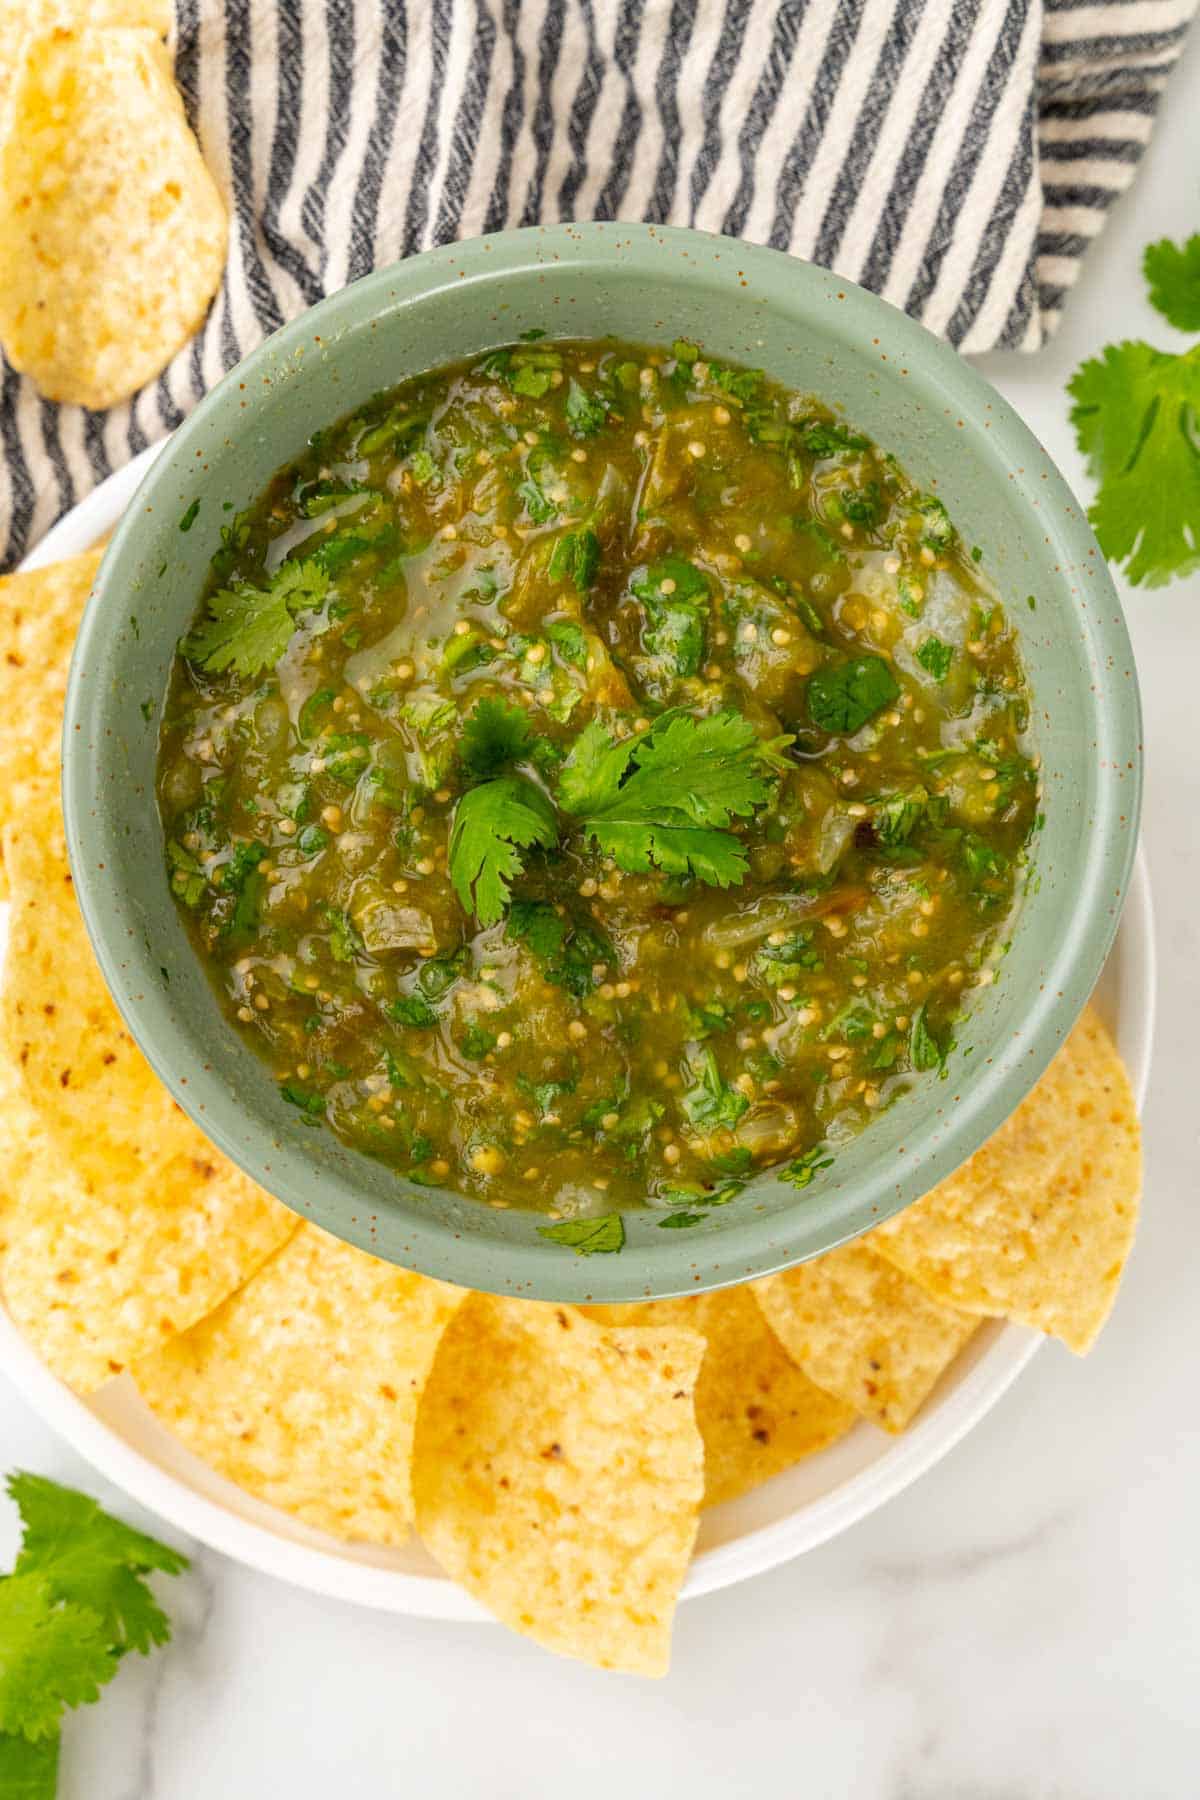 Overhead view of salsa in a light green bowl with cilantro on top; bowl is on a white plate with more tortilla chips on a white marble countertop next to a blue striped cloth napkin with more cilantro and a tortilla chip scattered about